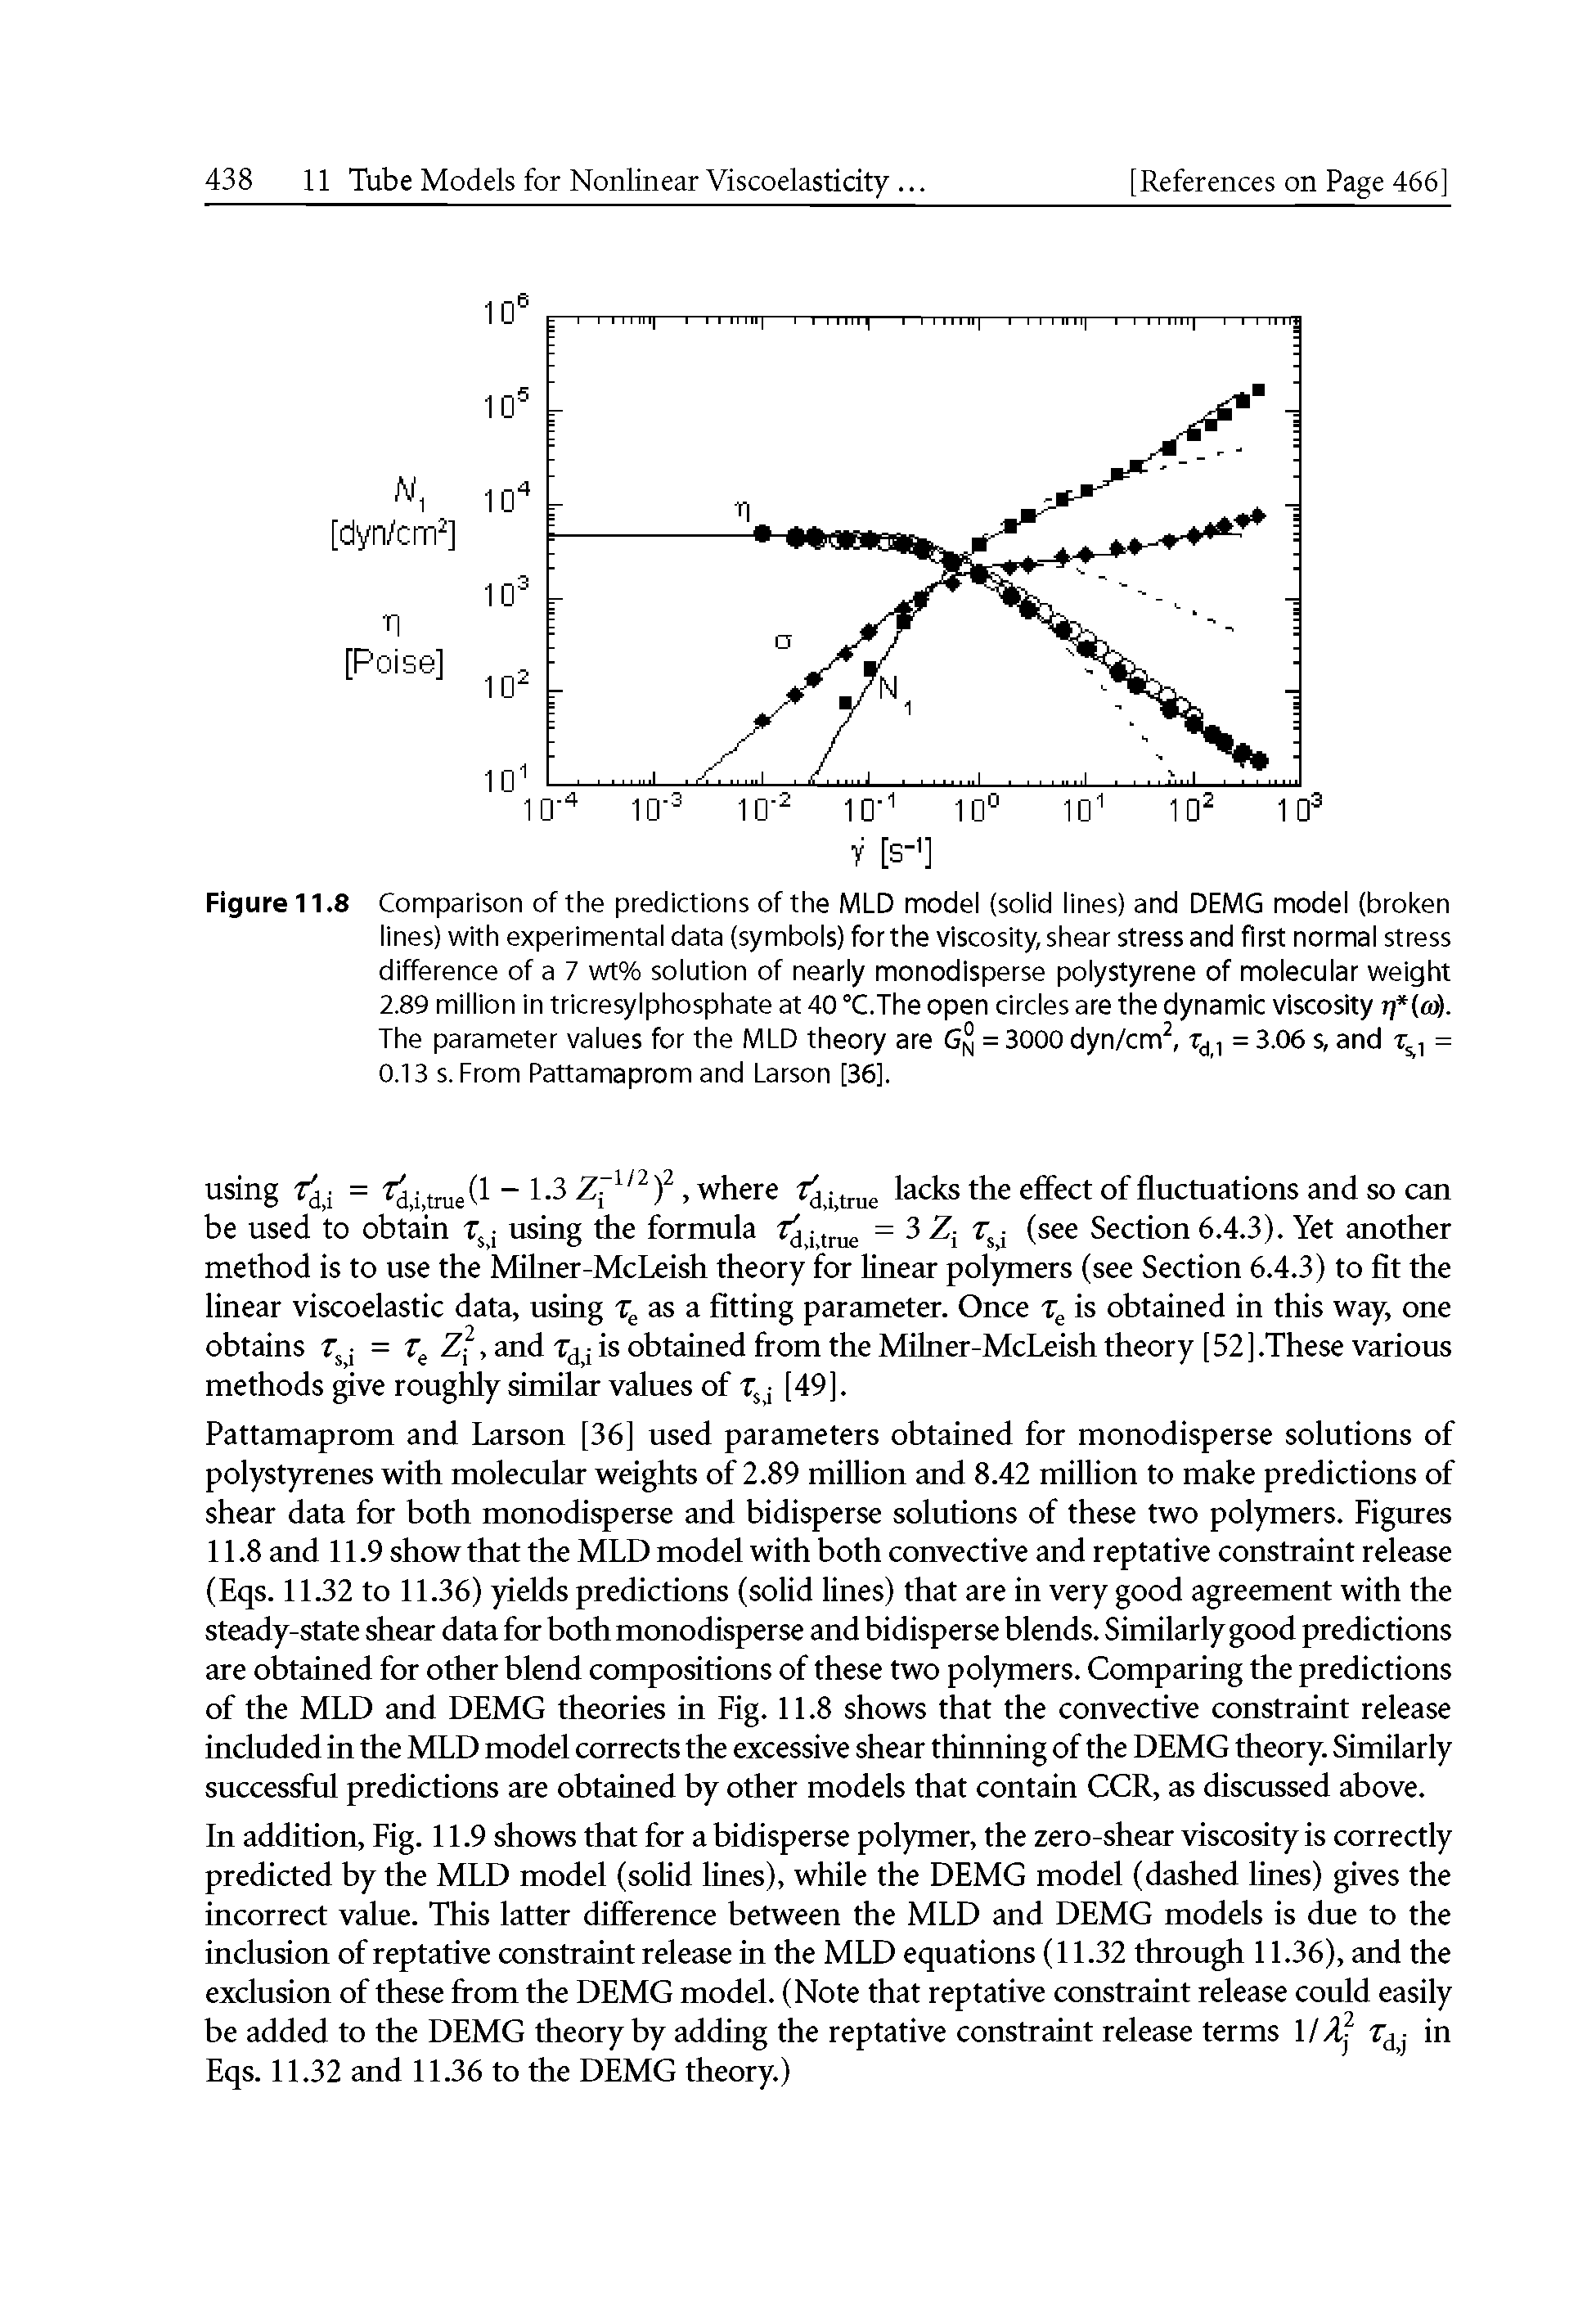 Figure 11.8 Comparison of the predictions of the MLD modei (soiid iines) and DEMG model (broken iines) with experimentai data (symbois) for the viscosity, shear stress and first normal stress difference of a 7 wt% soiution of neariy monodisperse polystyrene of molecular weight 2.89 million in tricresylphosphate at 40 °C.The open circles are the dynamic viscosity if oi. The parameter values for the MLD theory are G 5 = 3000 dyn/cm Tj, = 3.06 s, and = 0.13 s. From Pattamaprom and Larson [36].